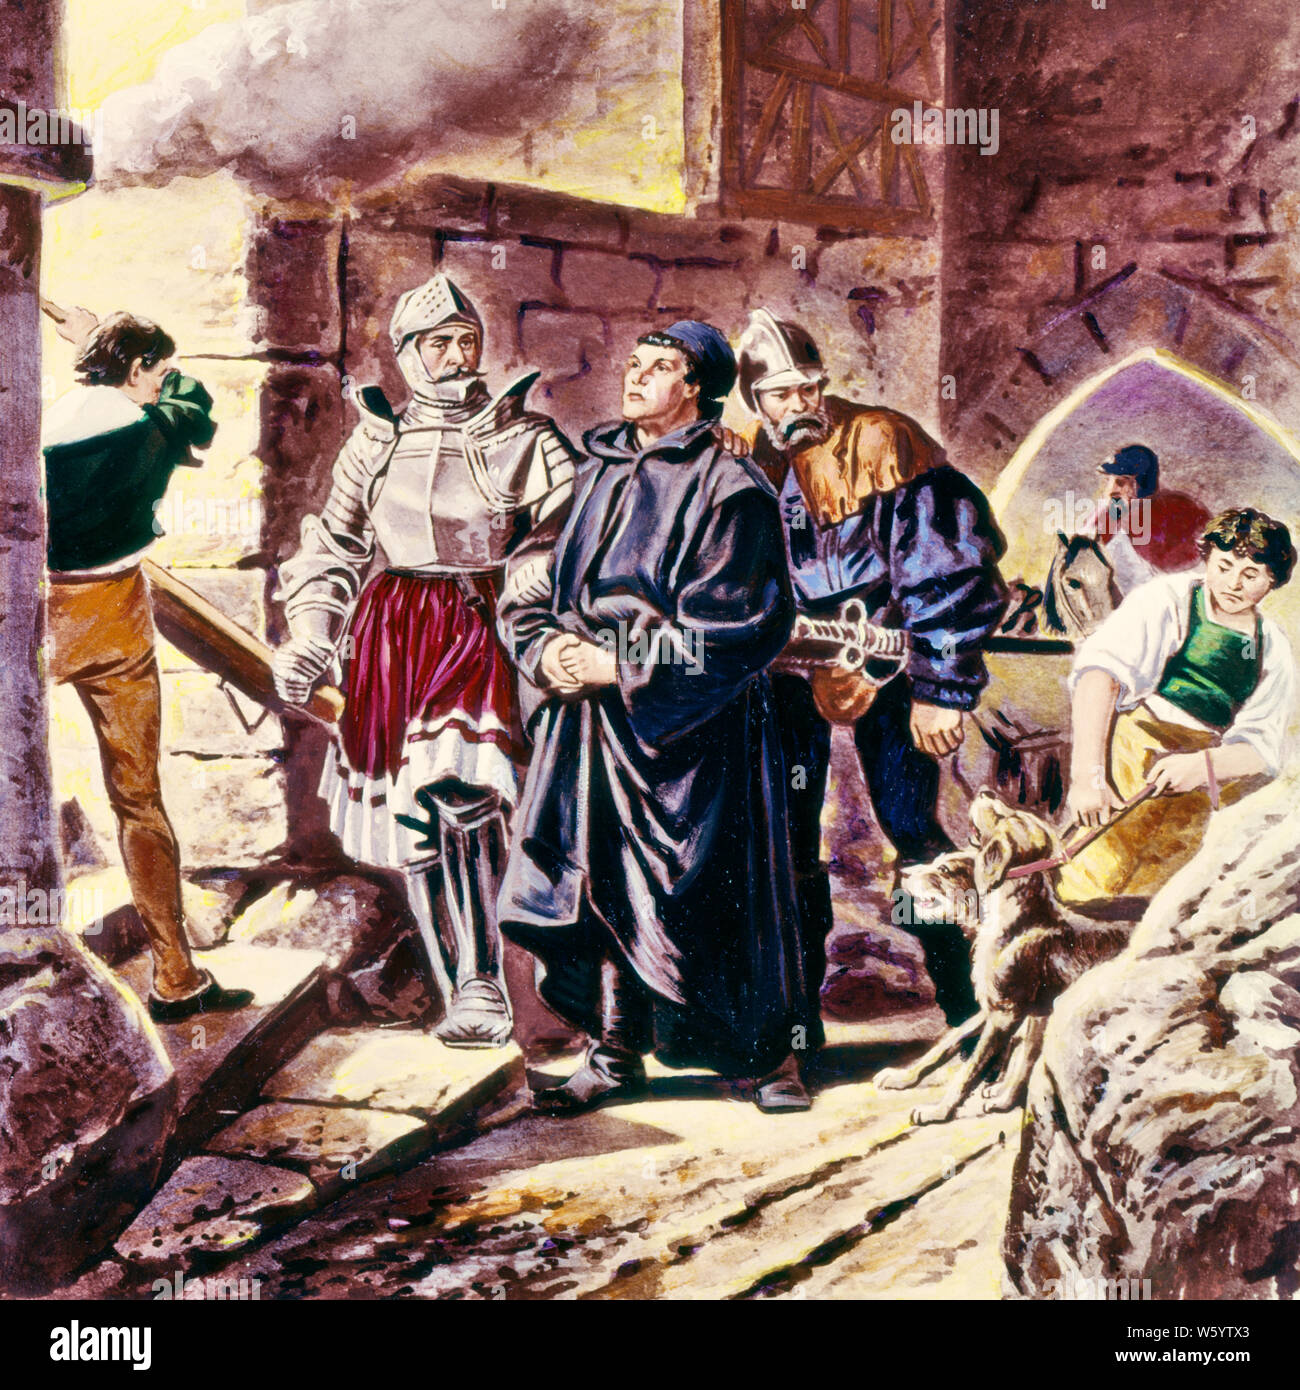 1500s 1520s MARTIN LUTHER ARRIVING AT WARTBURG CASTLE AFTER EXCOMMUNICATION BY POPE LEO X AFTER DIET OF WORMS EISENACH GERMANY - kr9043 SPL001 HARS LEADERSHIP MOST POWERFUL ARRIVING INNOVATION AT BY INTO OF AUTHORITY FOLLOWING REFORMER MARTIN LUTHER MONK CONCEPTUAL ANCIENT GREEK EISENACH LUTHERAN 1500s 1520s 1522 CAUCASIAN ETHNICITY EXCOMMUNICATED NEW TESTAMENT OLD FASHIONED PROTESTANT REFORMATION THEOLOGIAN TRANSLATED VERNACULAR Stock Photo